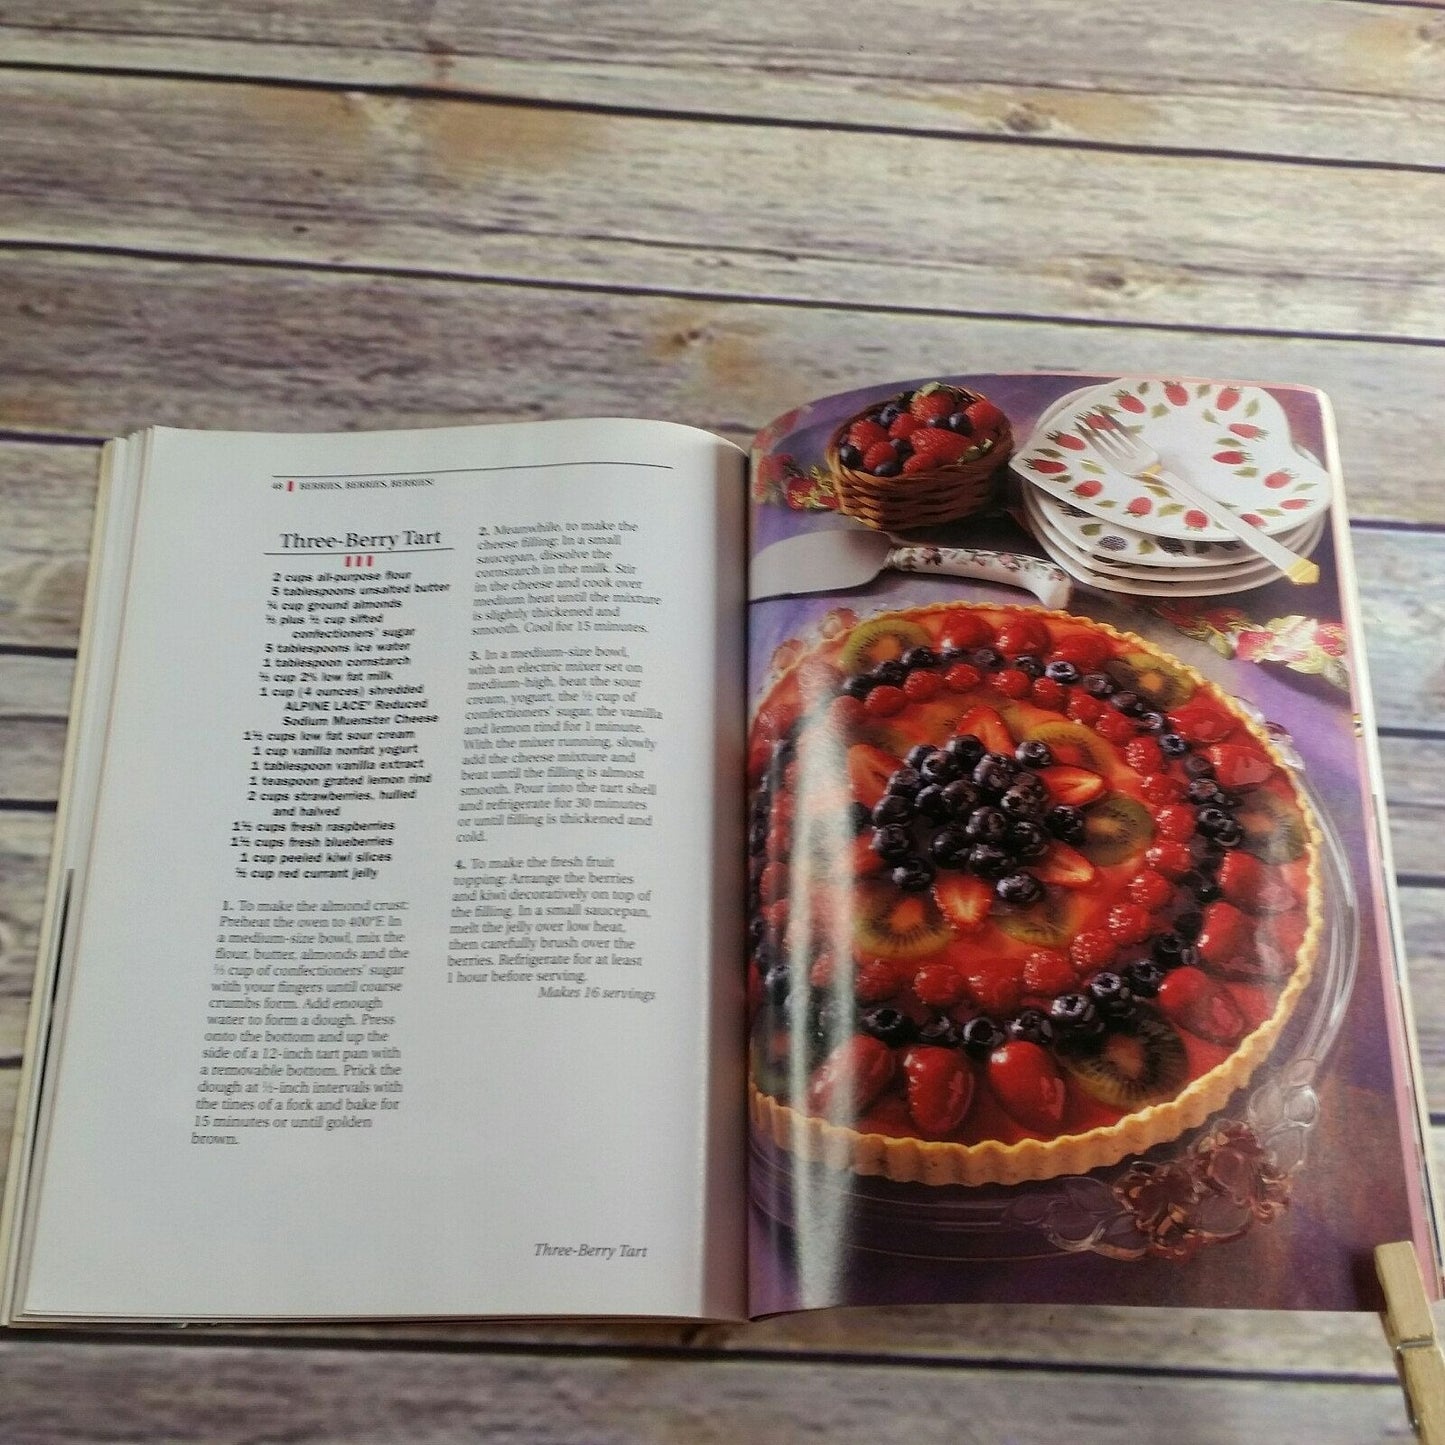 Vintage Cookbook No Bake Desserts Recipes 1999 Paperback Easy Home Cooking Kids Treats Great Smoothies Publications International